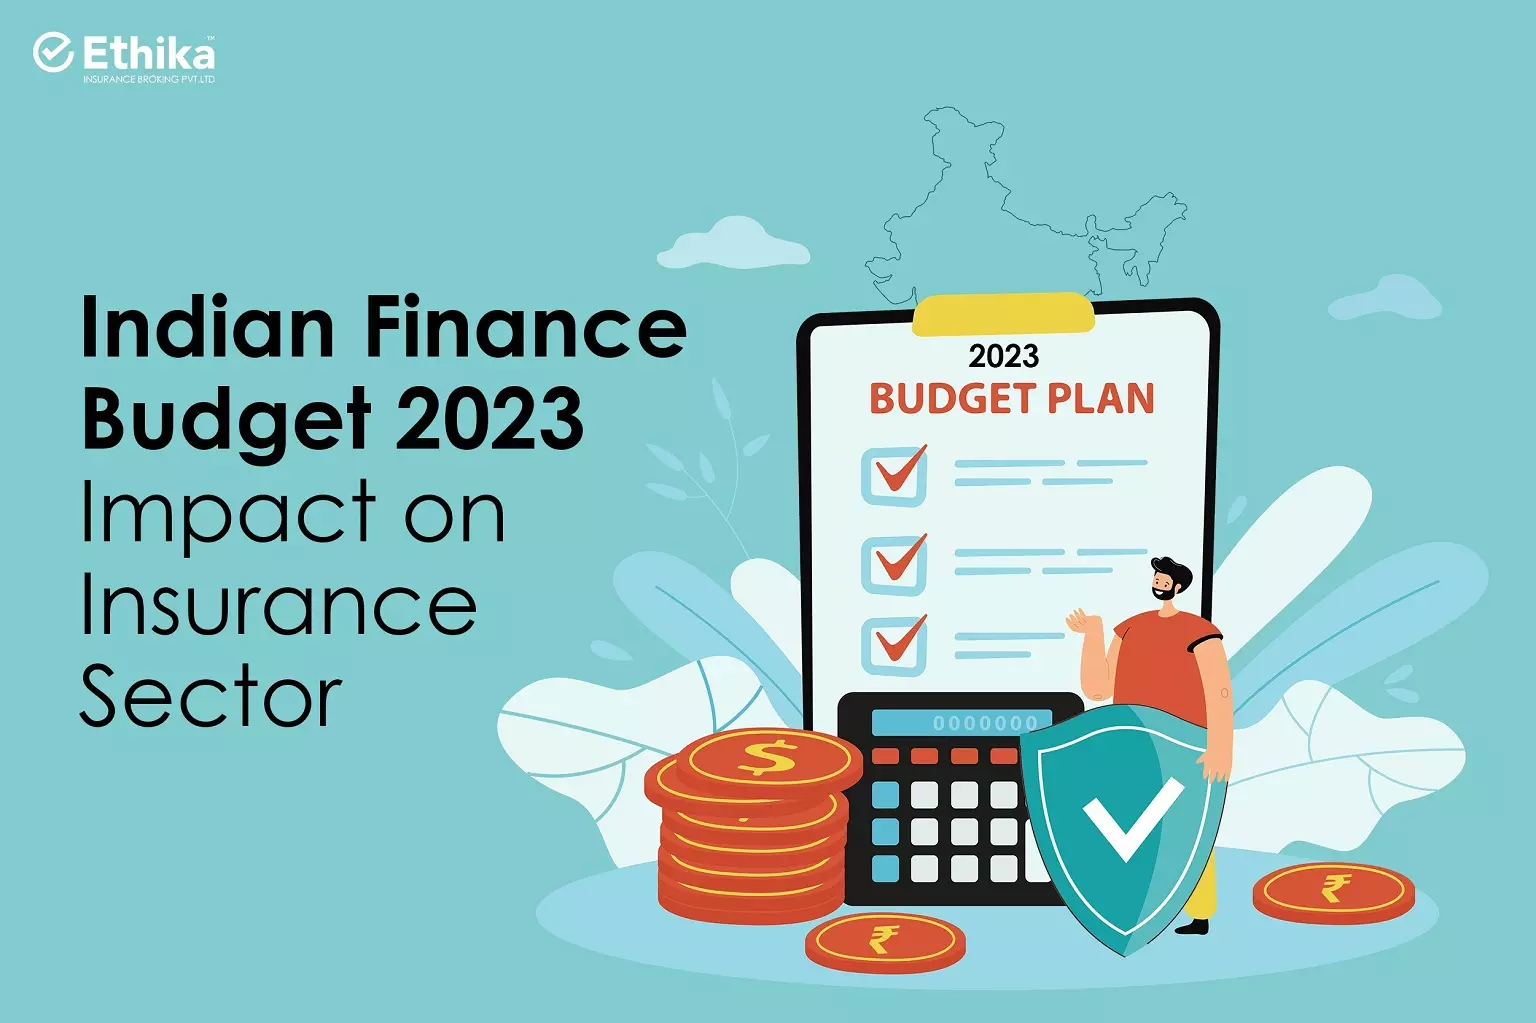 Indian Finance Budget 2023 - Impact on Insurance Sector